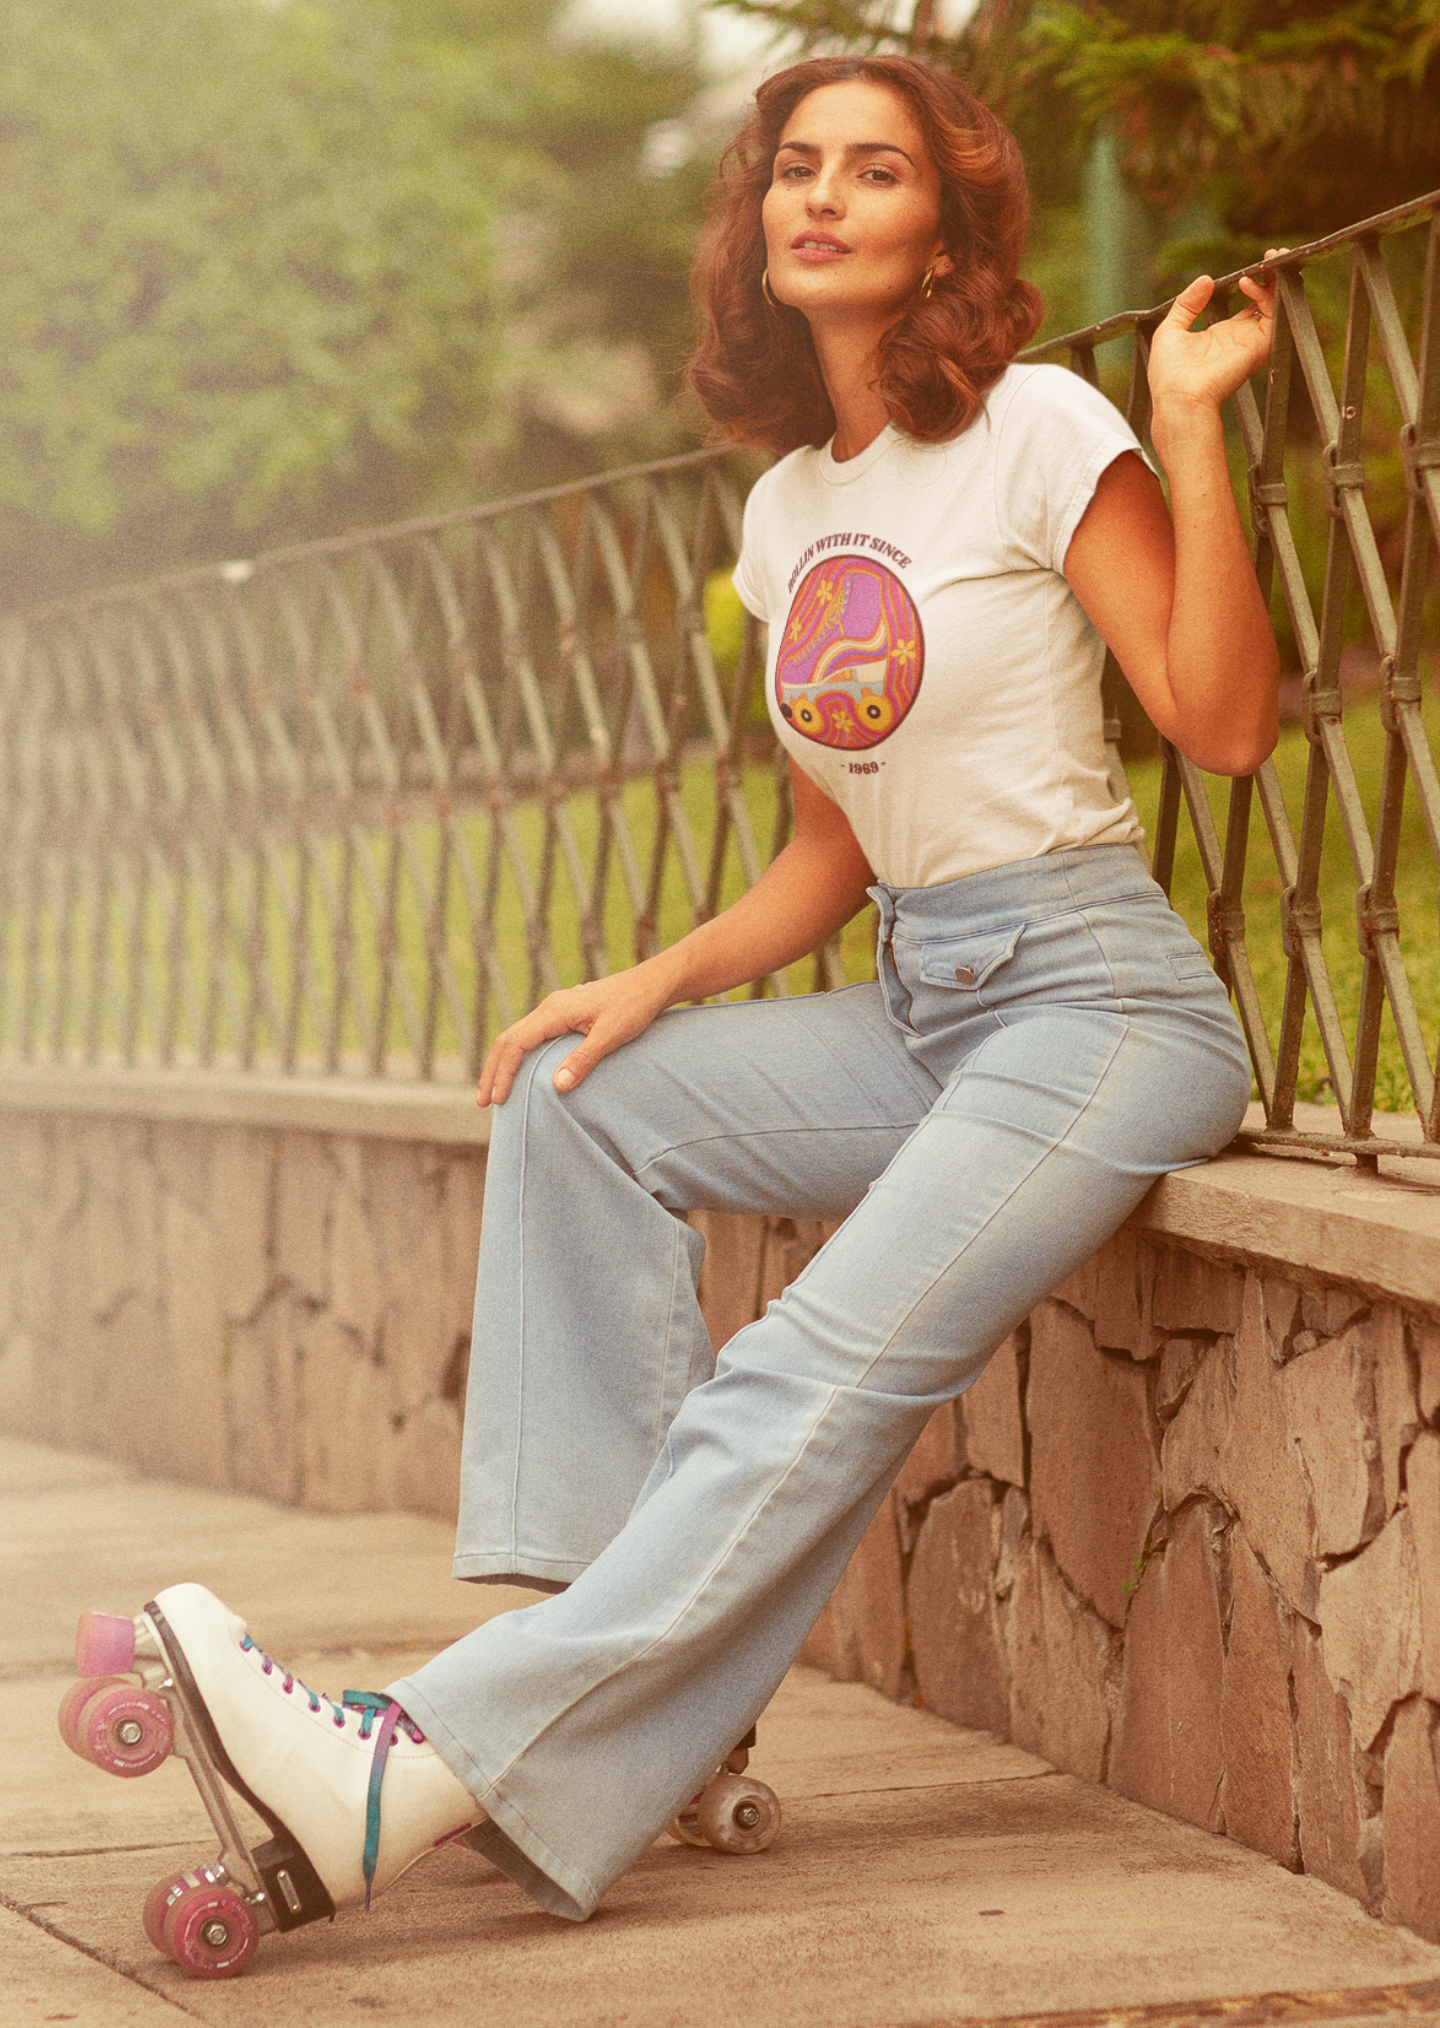 Rollin with it since - 1969 - Vintage Style Women's Short Sleeve T-Shirt